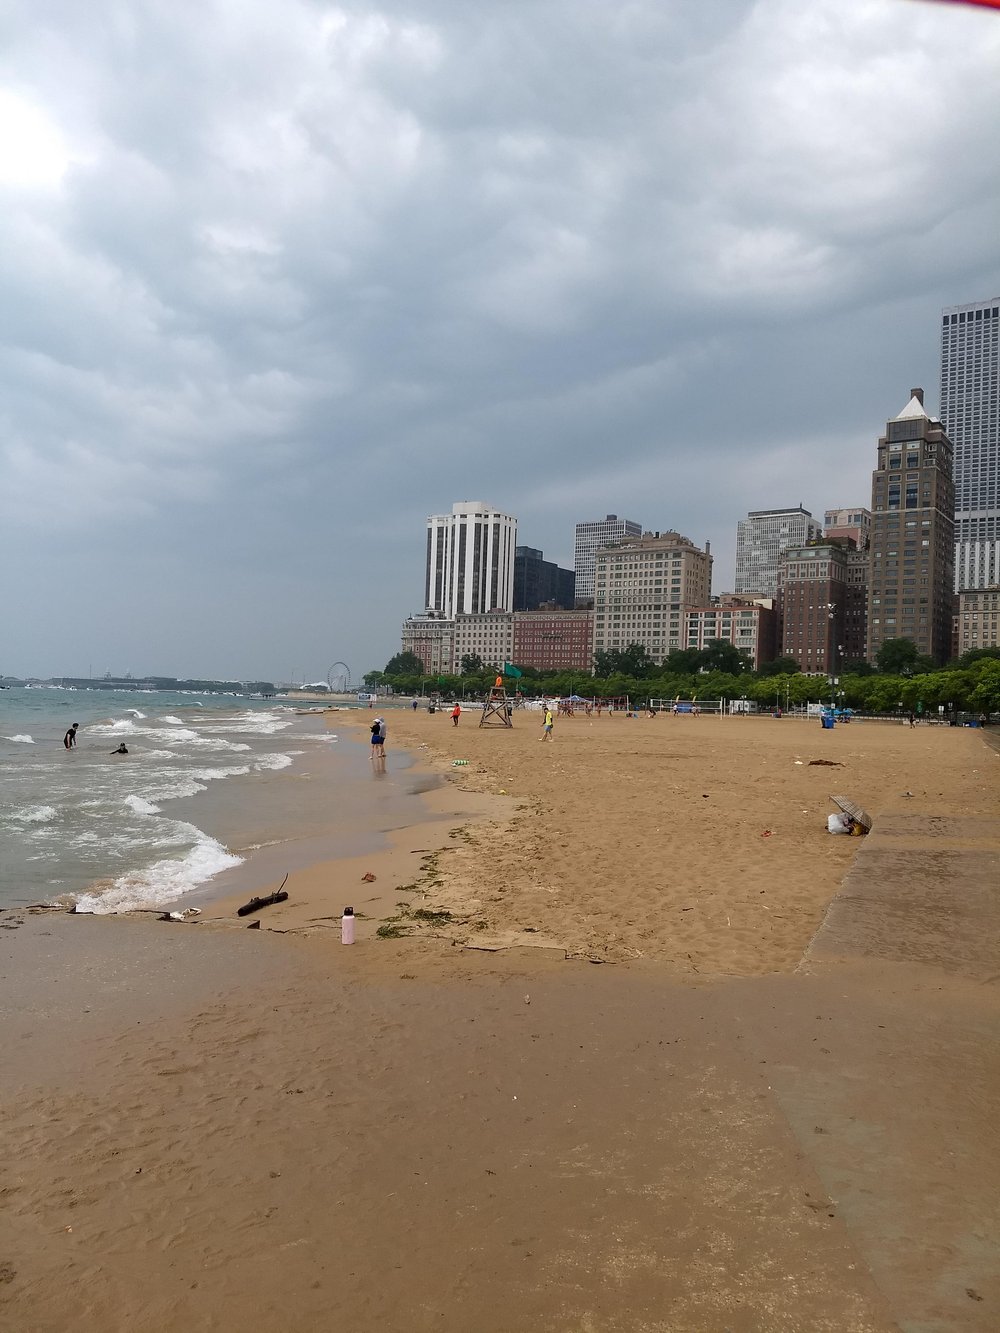 Oak Street Beach in Chicago on a cold rainy Saturday in August.